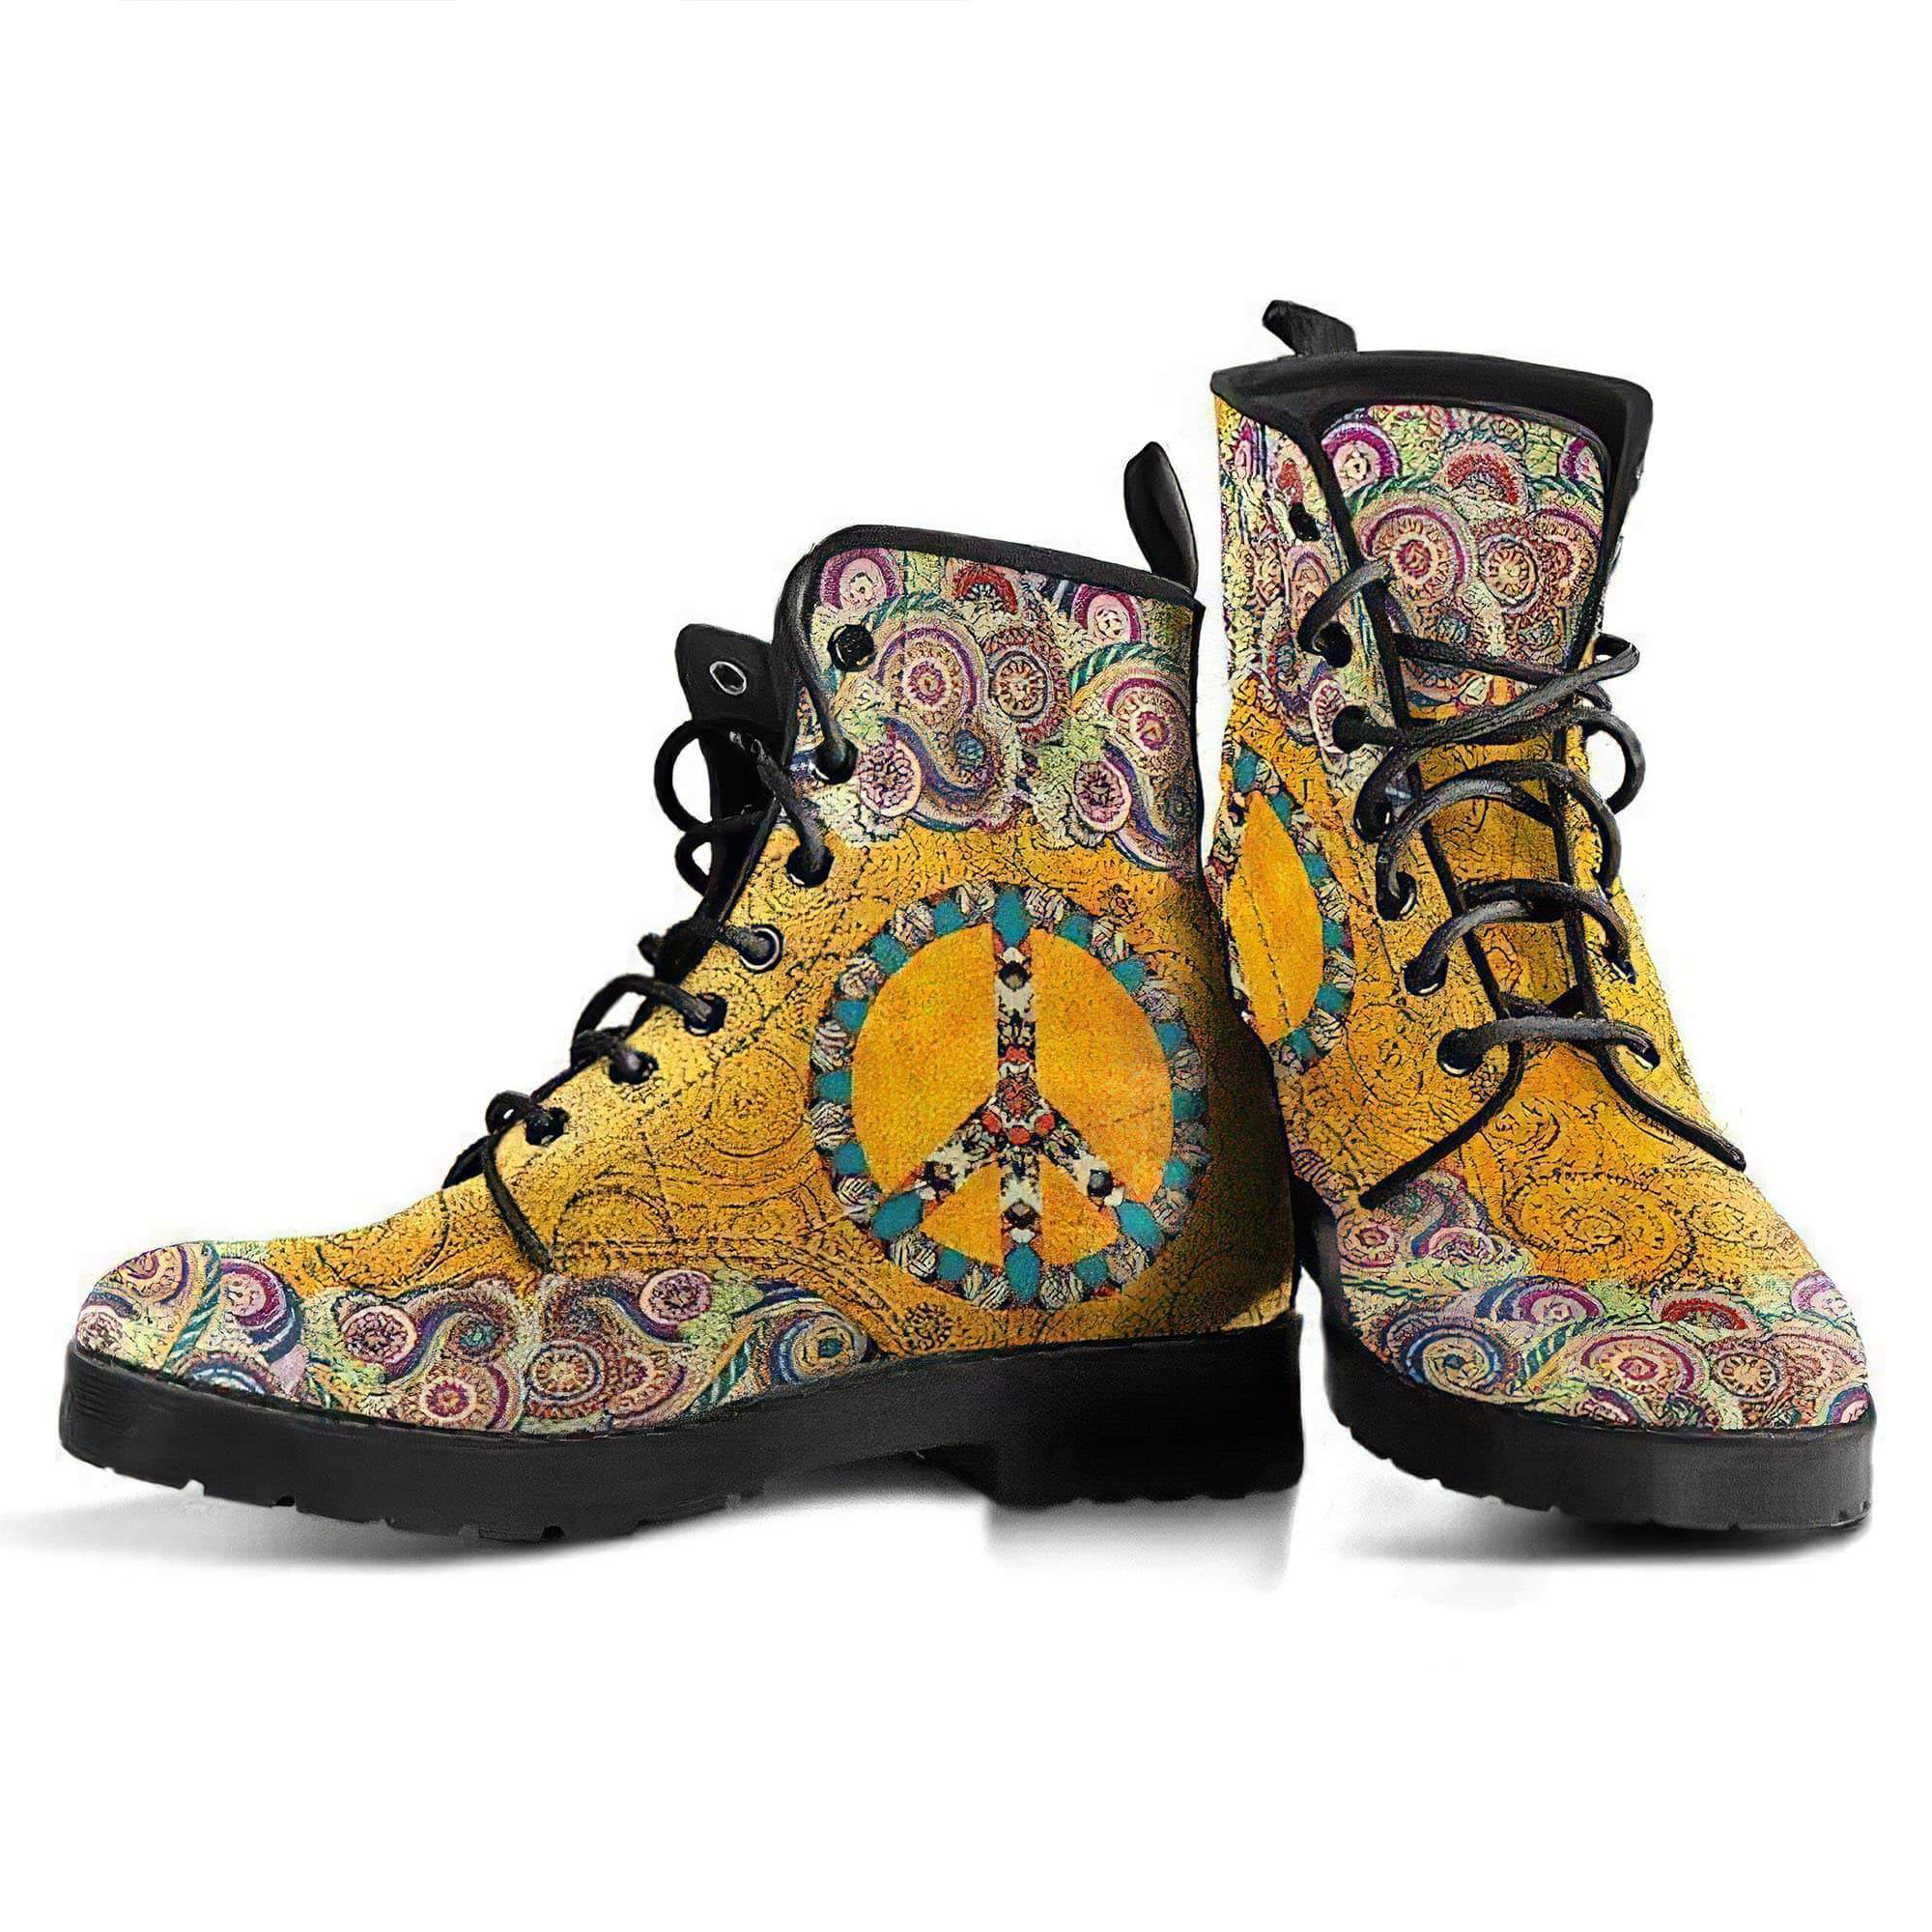 peace-mandala-yellow-handcrafted-boots-women-s-leather-boots-12051929563197.jpg